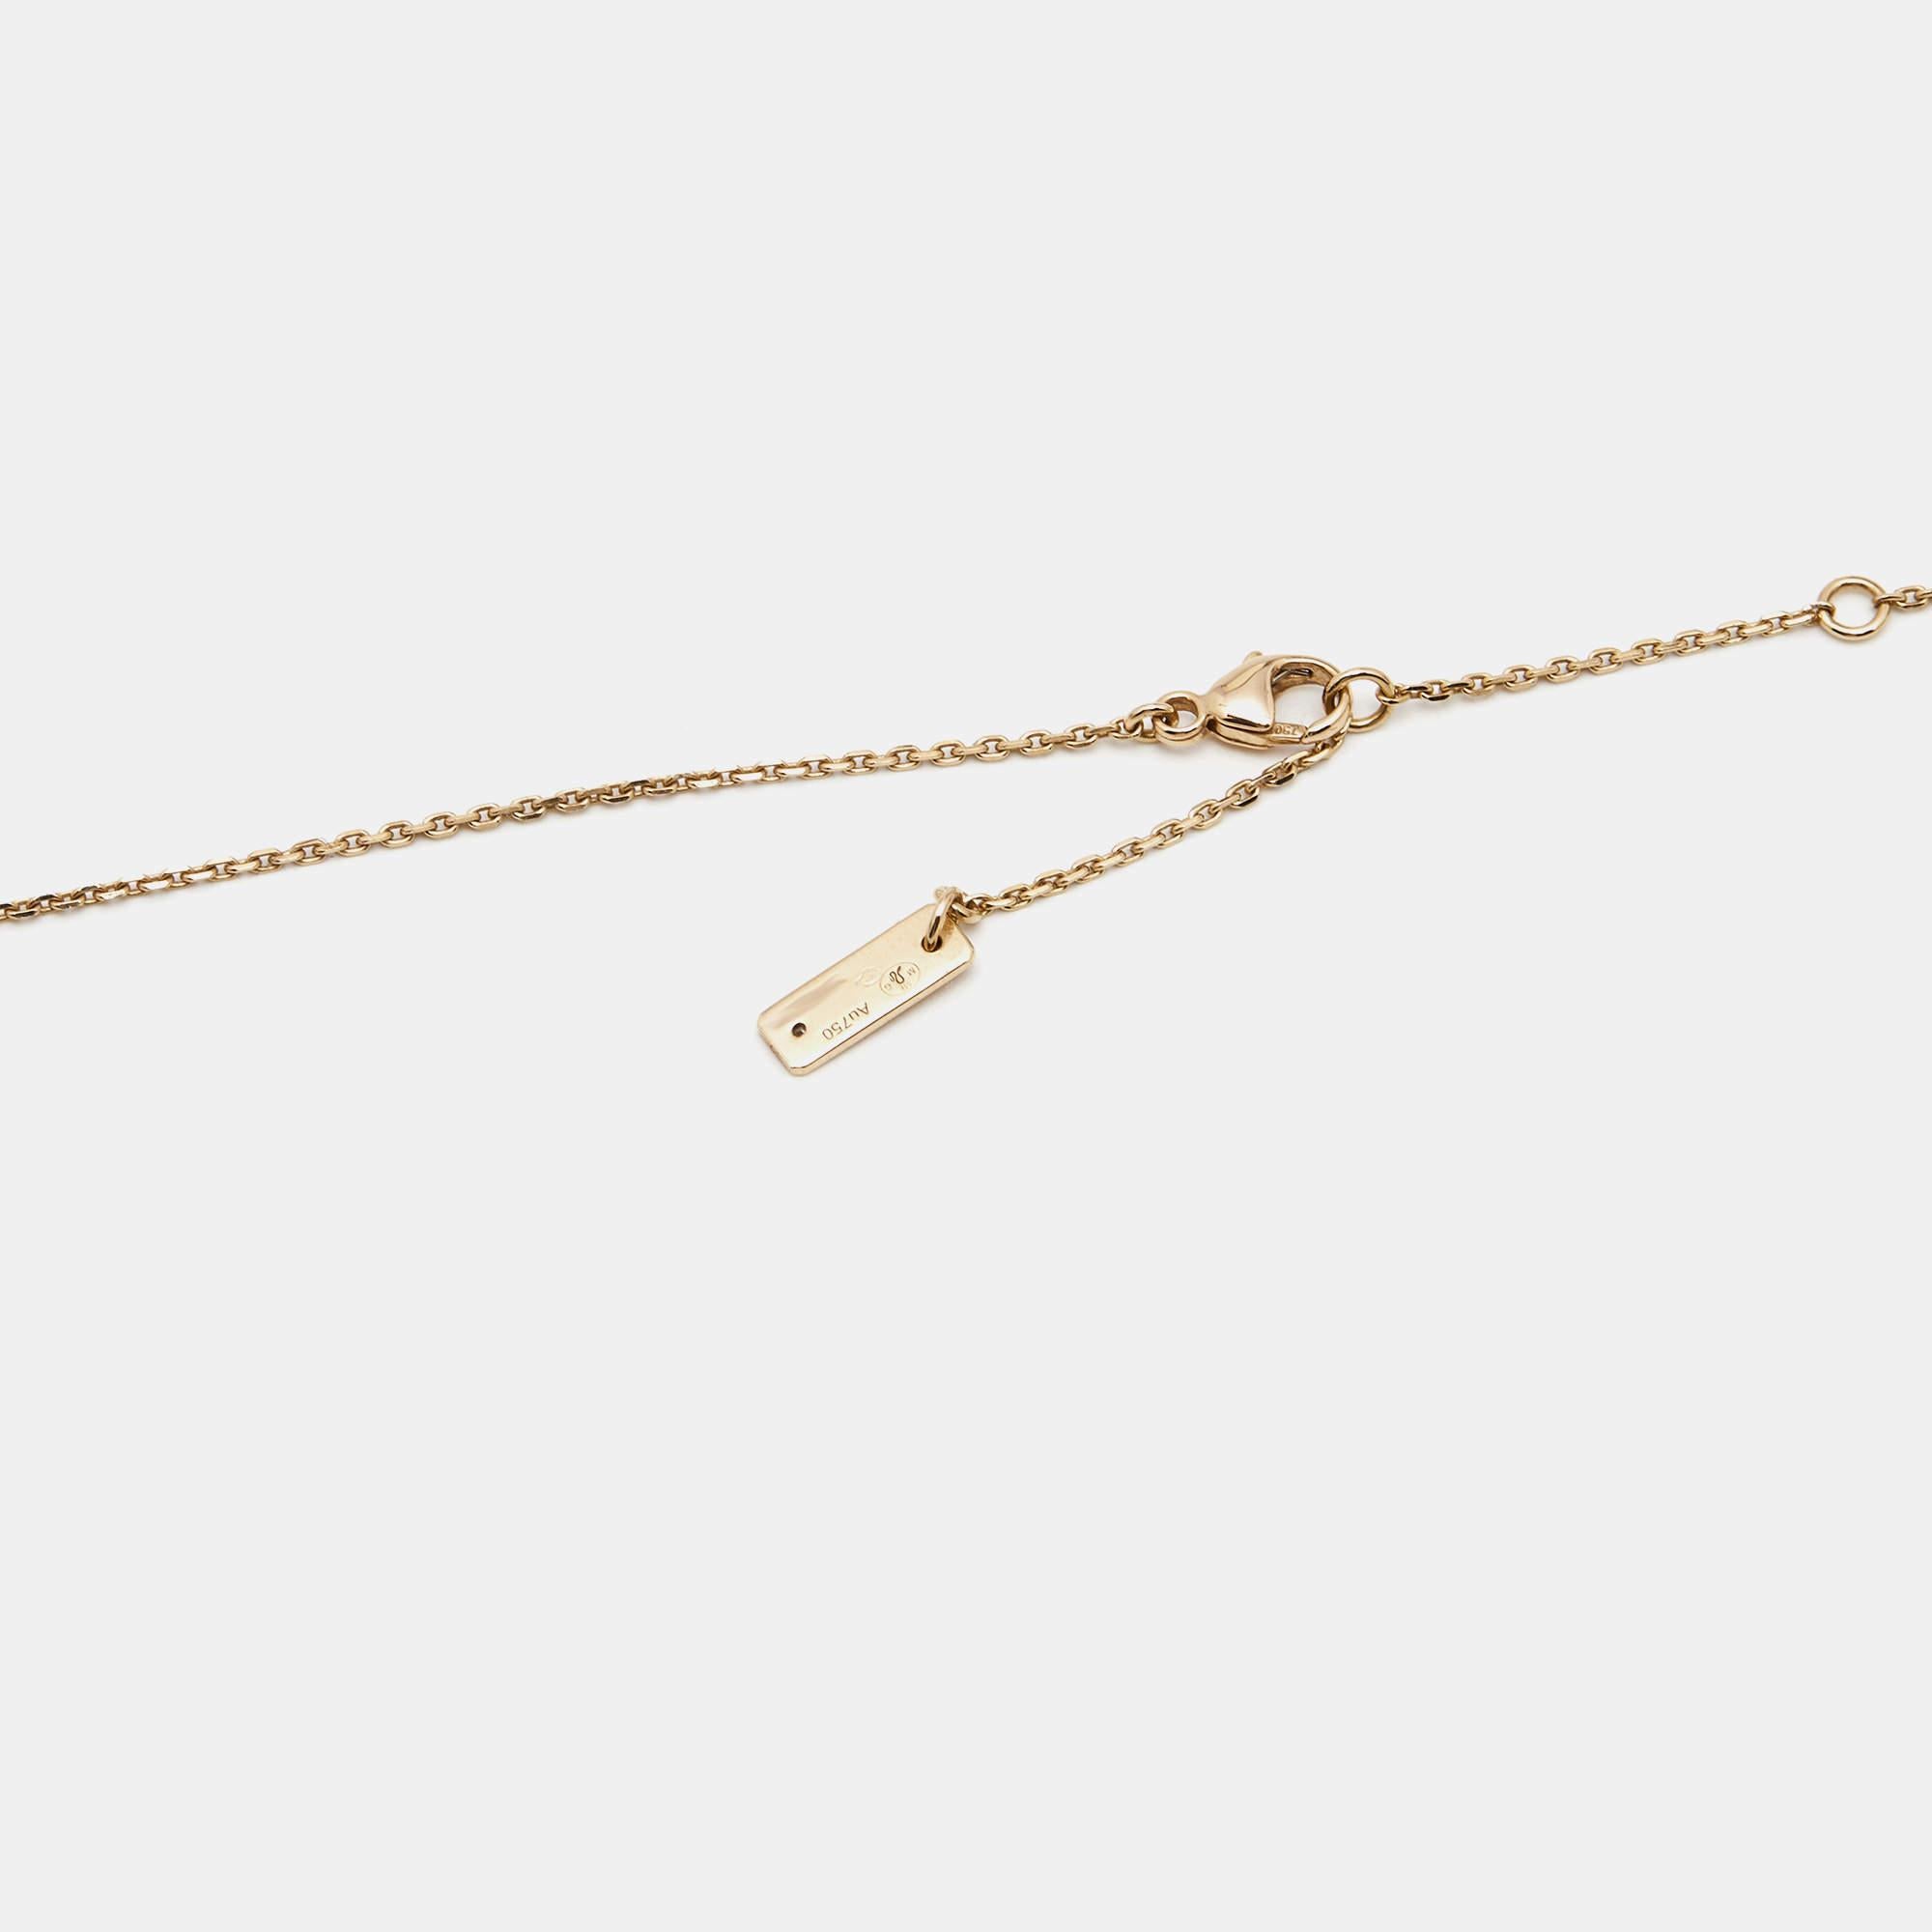 This beautiful Messika Move Uno necklace is fully crafted from 18k rose gold into a design that shows modern aesthetics and unparalleled elegance. The long chain has bezel and a single moving diamond trapped inside the signature cage.

Includes: